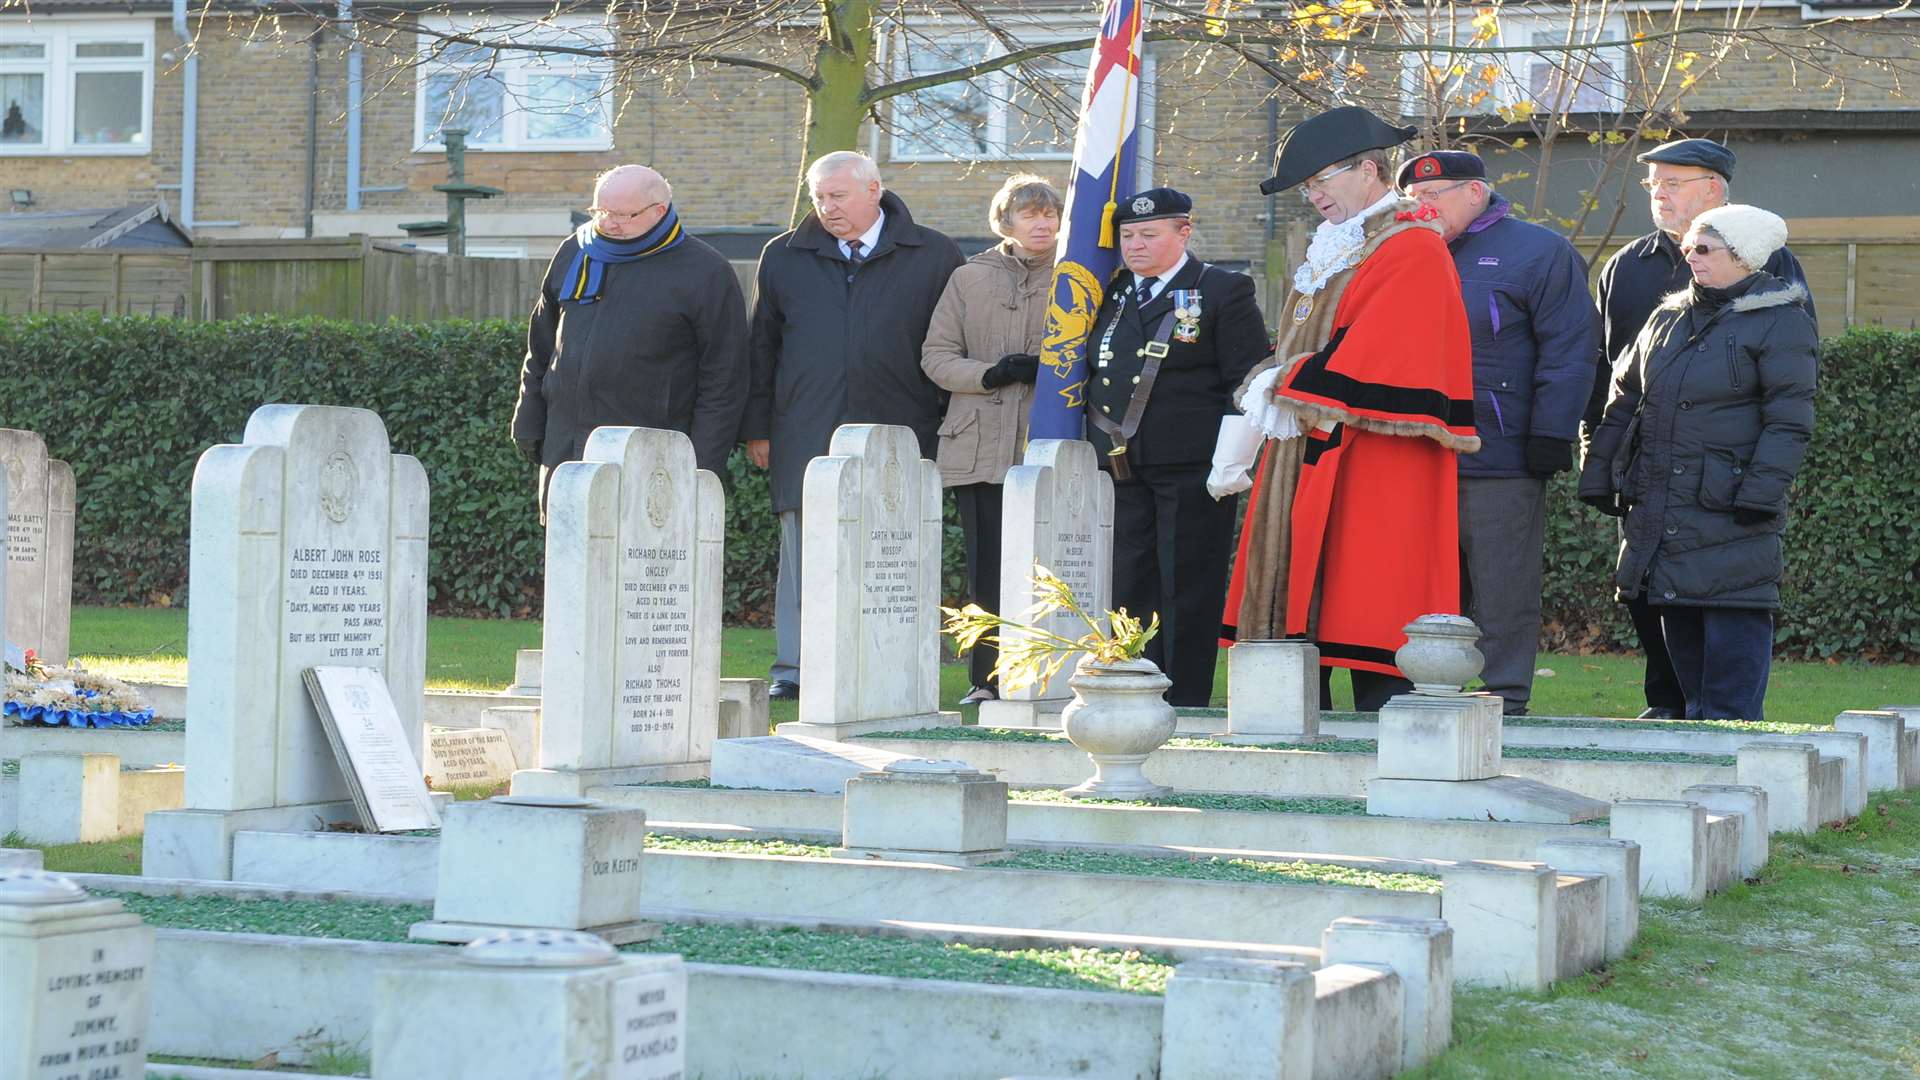 Gillingham Cemetery, Woodlands Road. 2012 Memorial Service to remeber Cadets who were killed by a bus in 1951. Mayor Vaughan Hewett by the graves